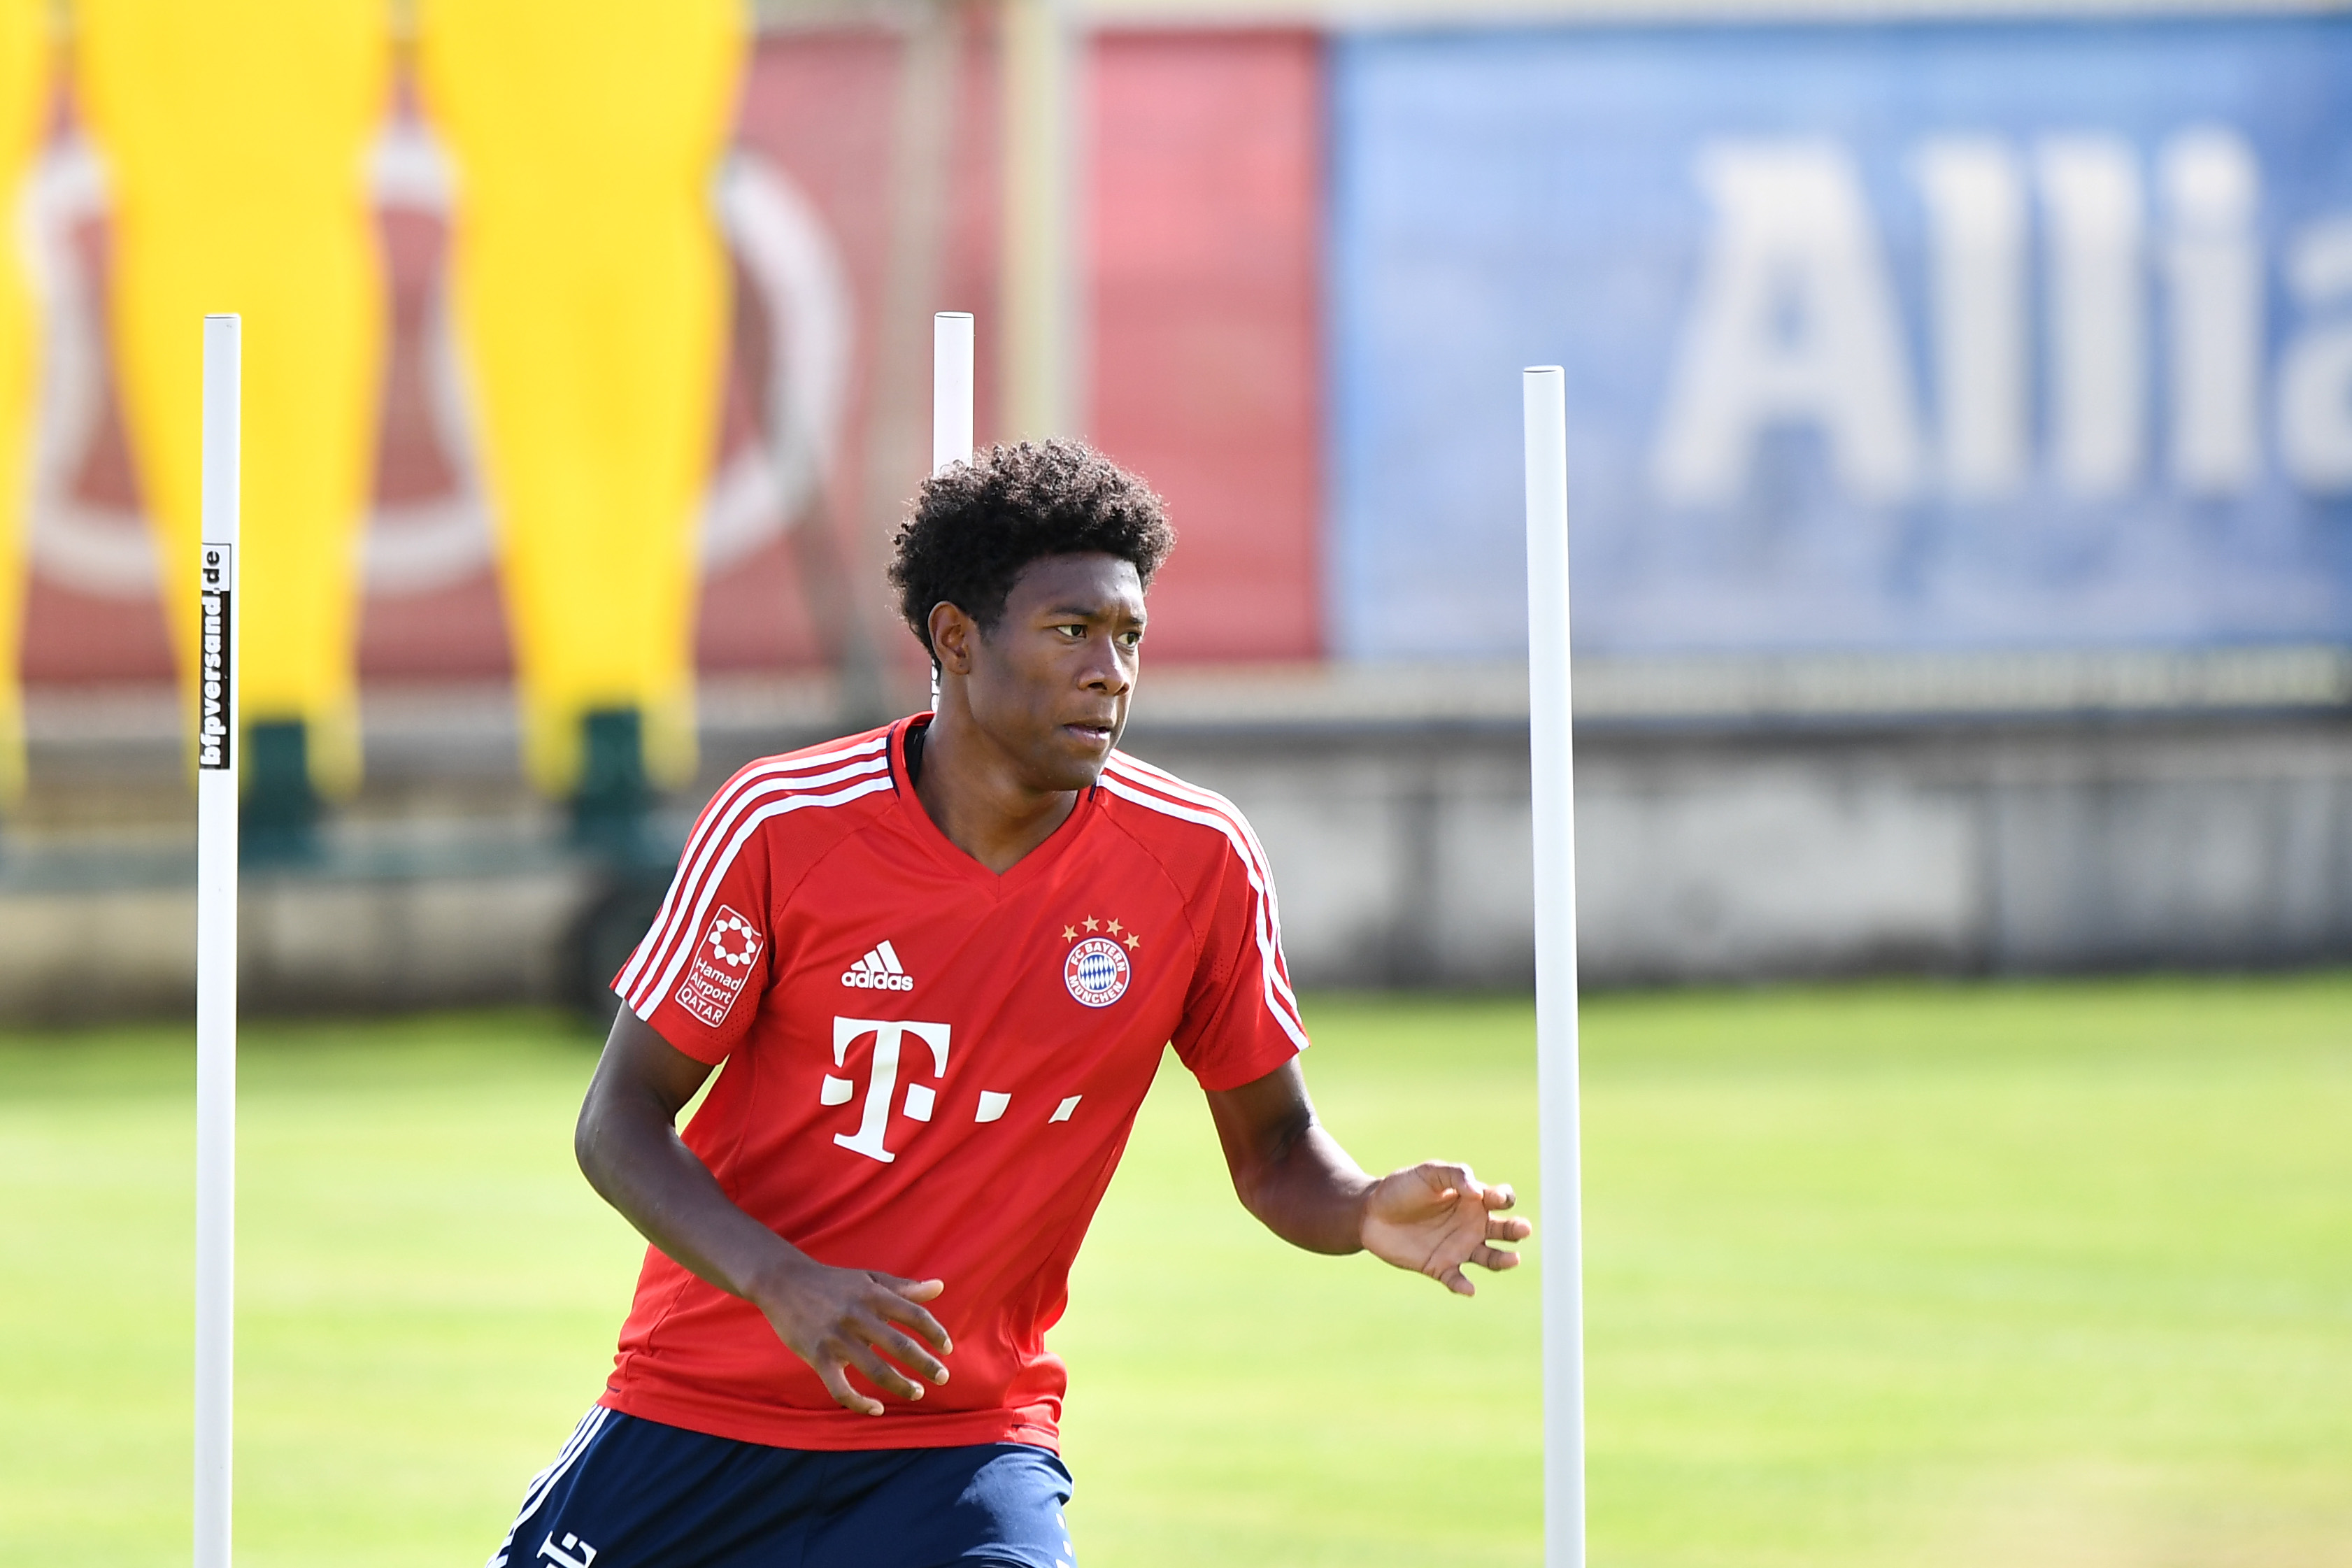 MUNICH, GERMANY - JULY 10: David Alaba of FC Bayern Muenchen in action during a training session at Saebener Strasse training ground on July 10, 2017 in Munich, Germany. (Photo by Sebastian Widmann/Bongarts/Getty Images)